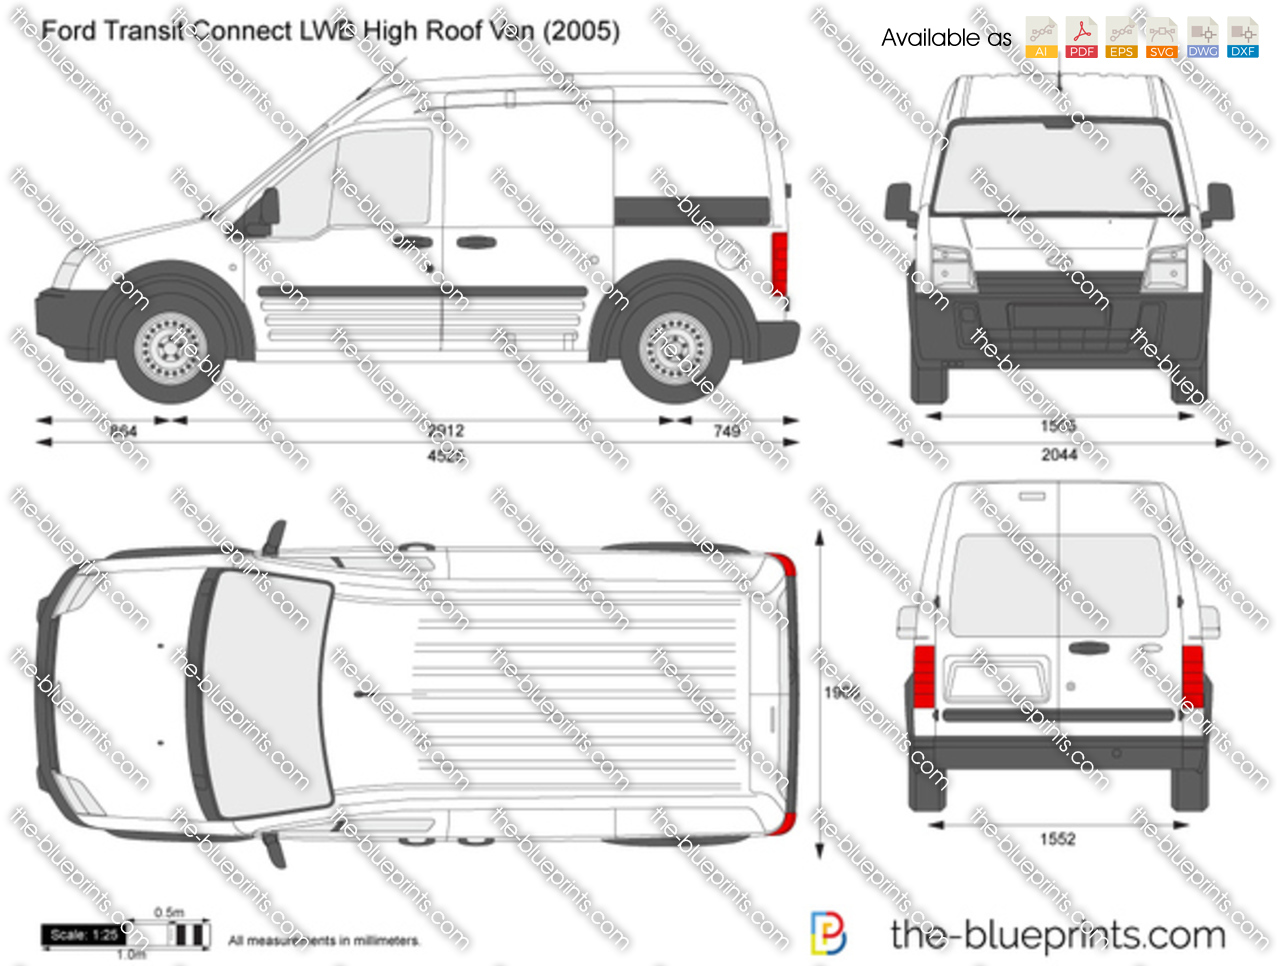 Ford Transit Connect LWB High Roof Van